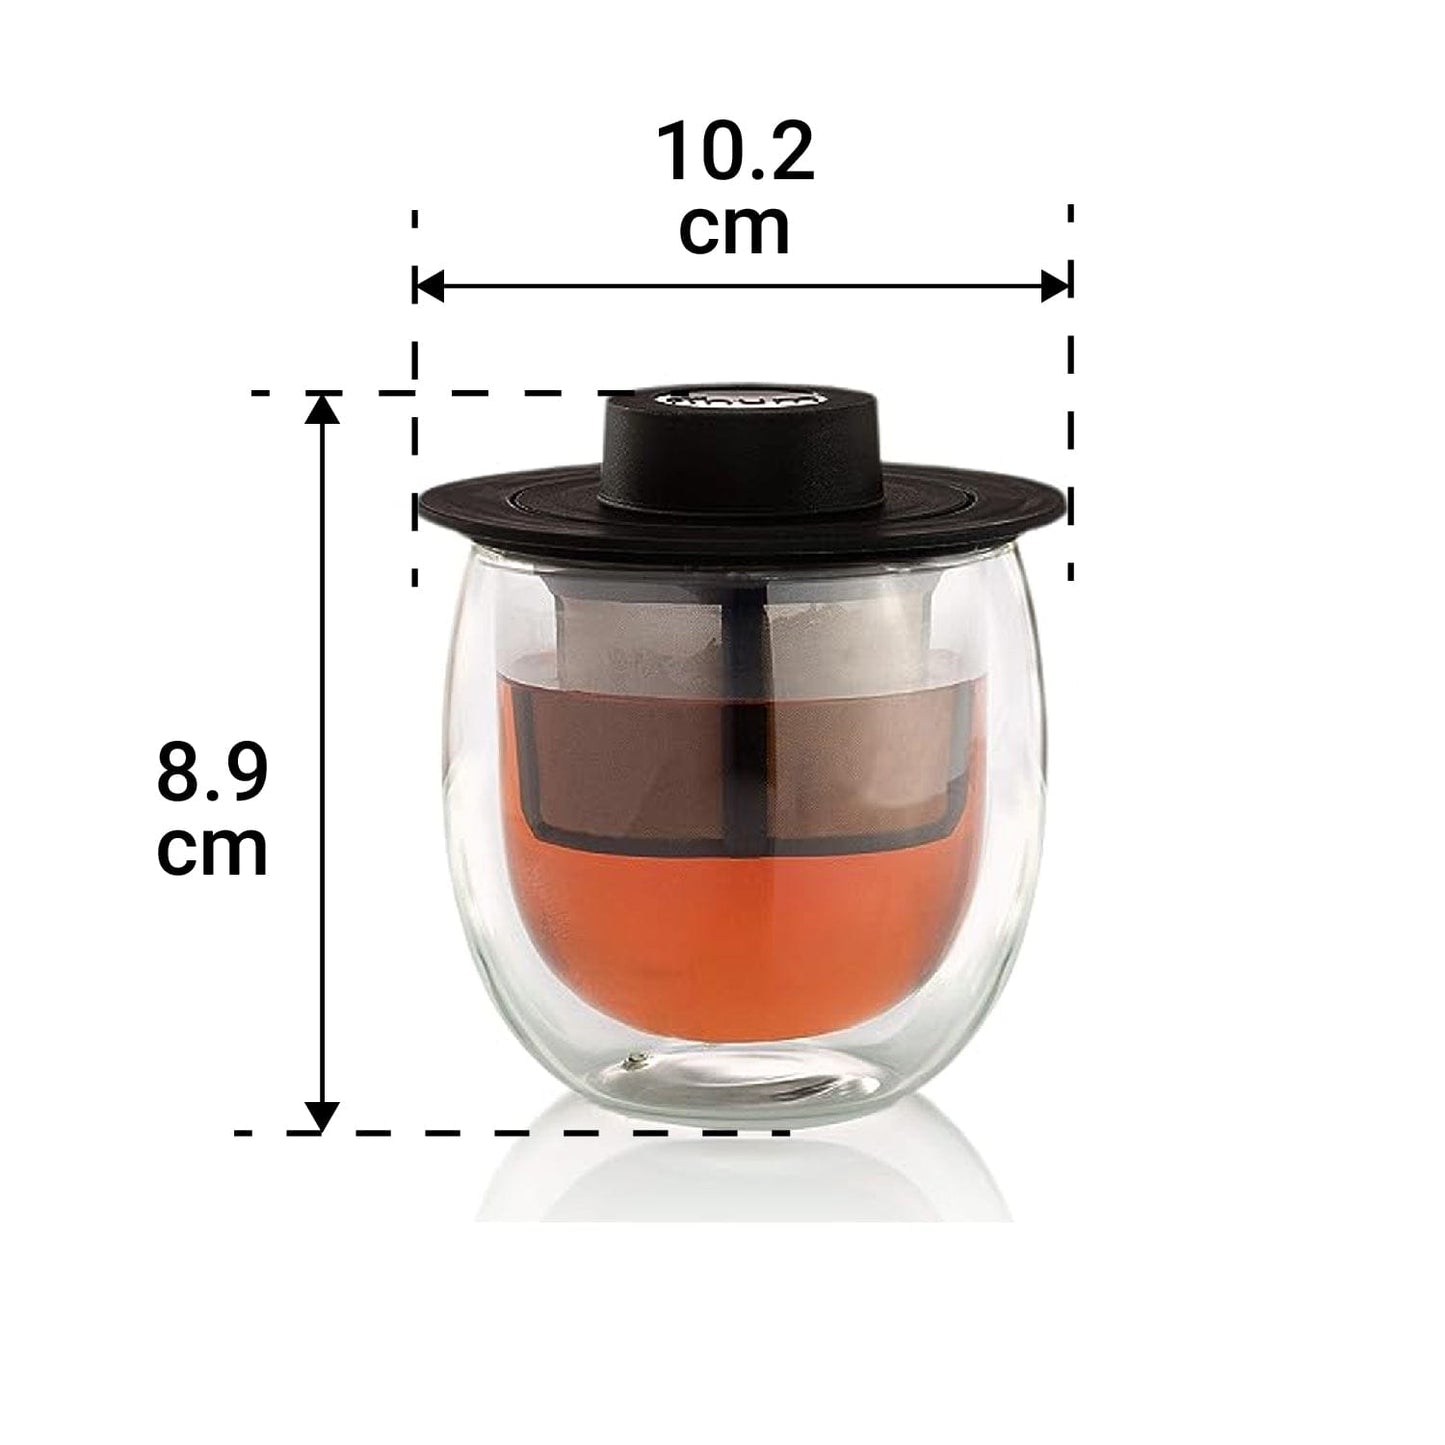 Finum Double Wall Glass Cup, 7 oz.